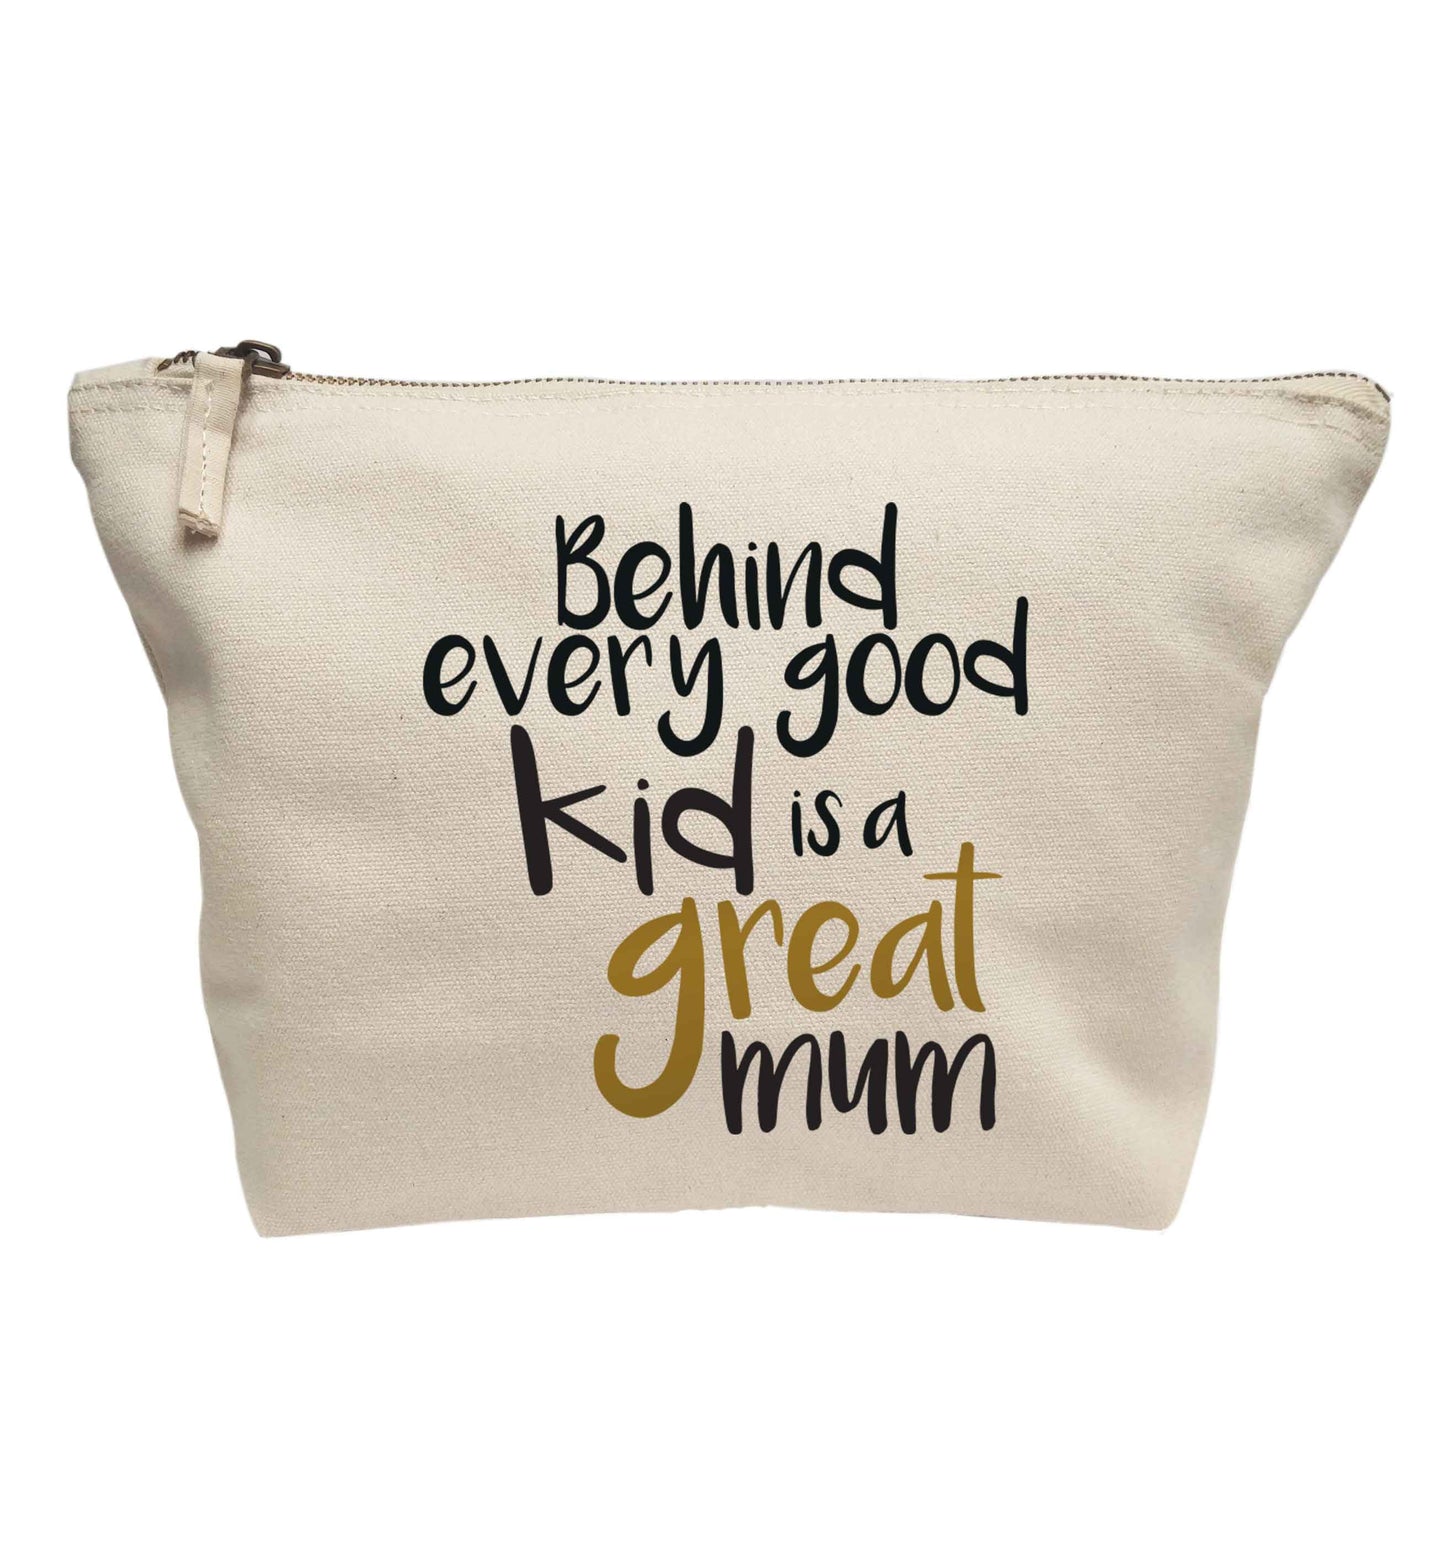 Behind every good kid is a great mum | Makeup / wash bag